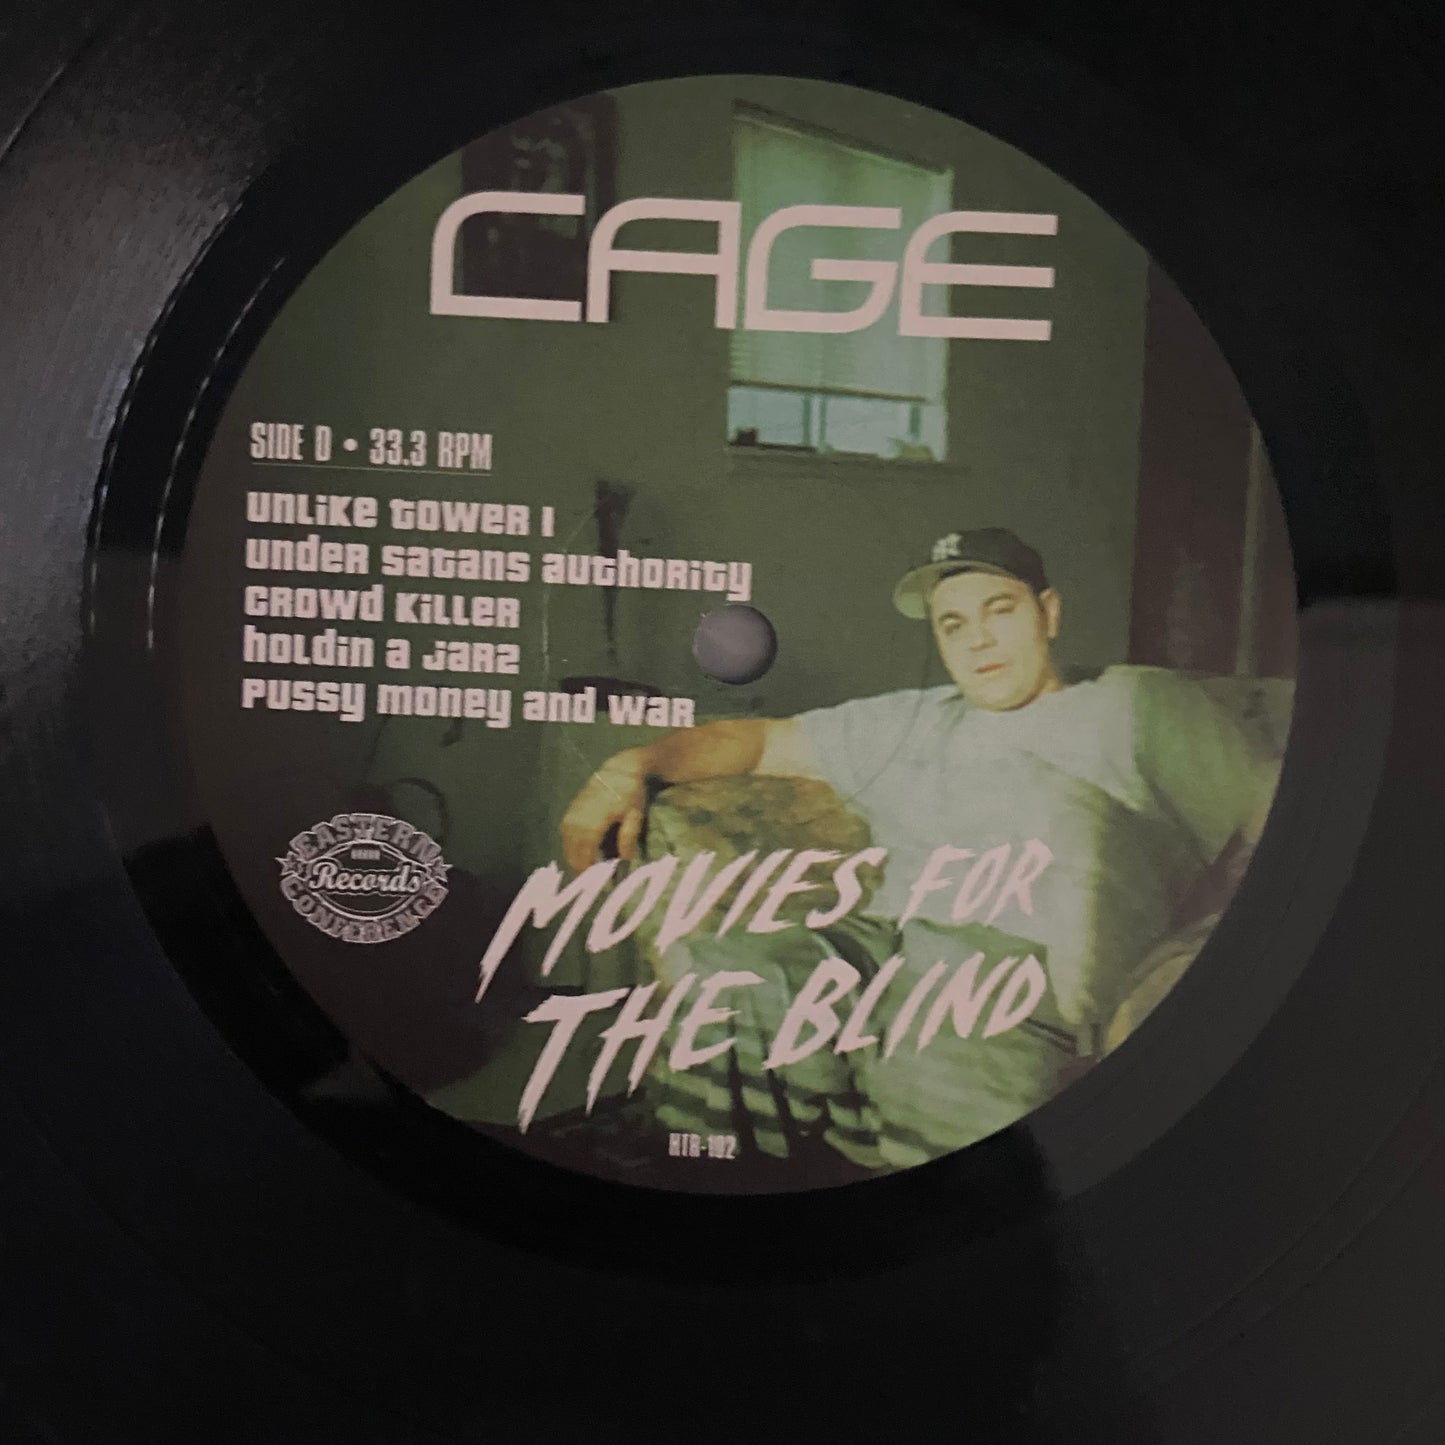 Cage - Movies For The Blind (2xLP, Album) HIP HOP